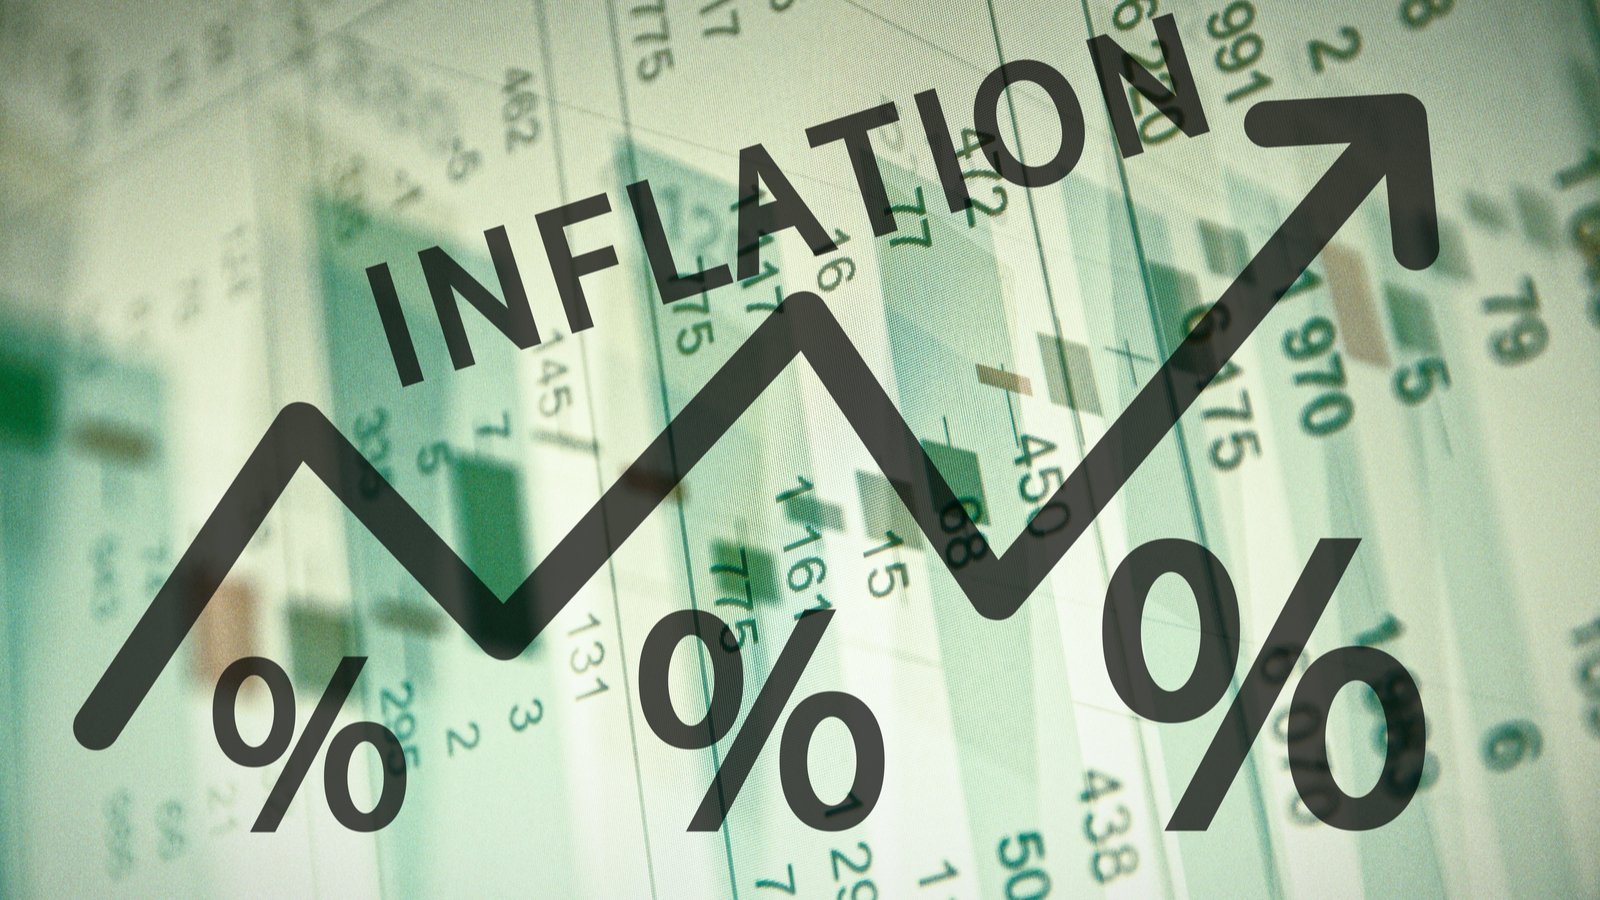 Inflation Surges by Most Since 2008 Recession, With Consumer Prices Jumping 5% Over Last Year